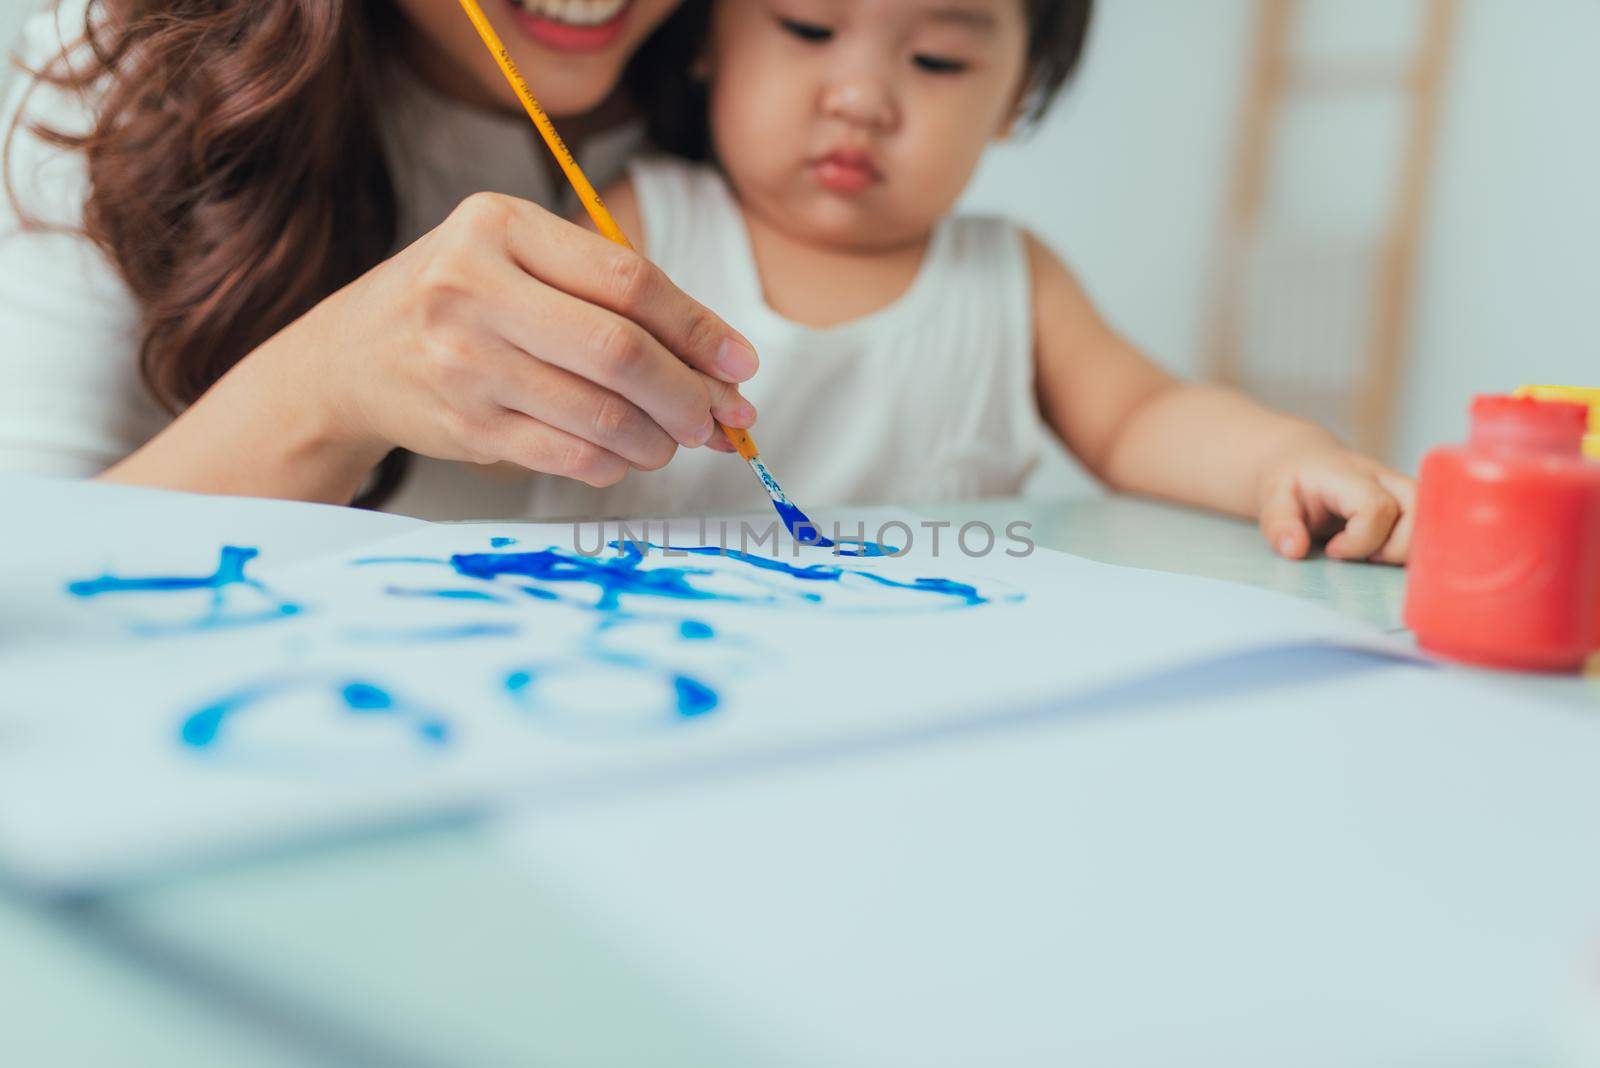 Mother and daughter have a fun painting with watercolor paints